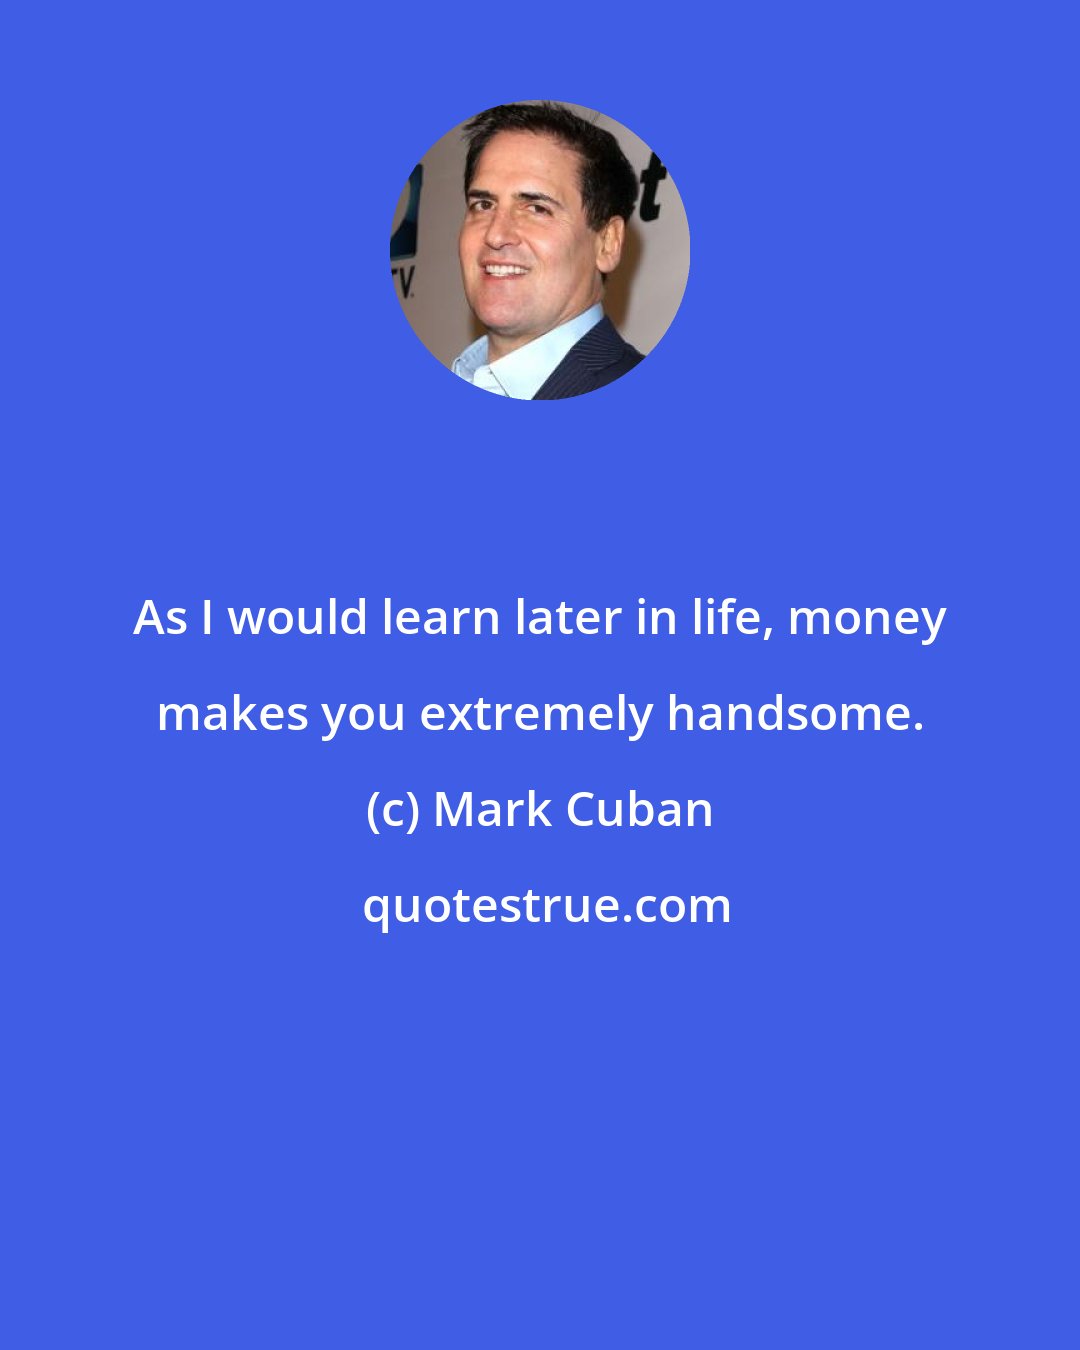 Mark Cuban: As I would learn later in life, money makes you extremely handsome.